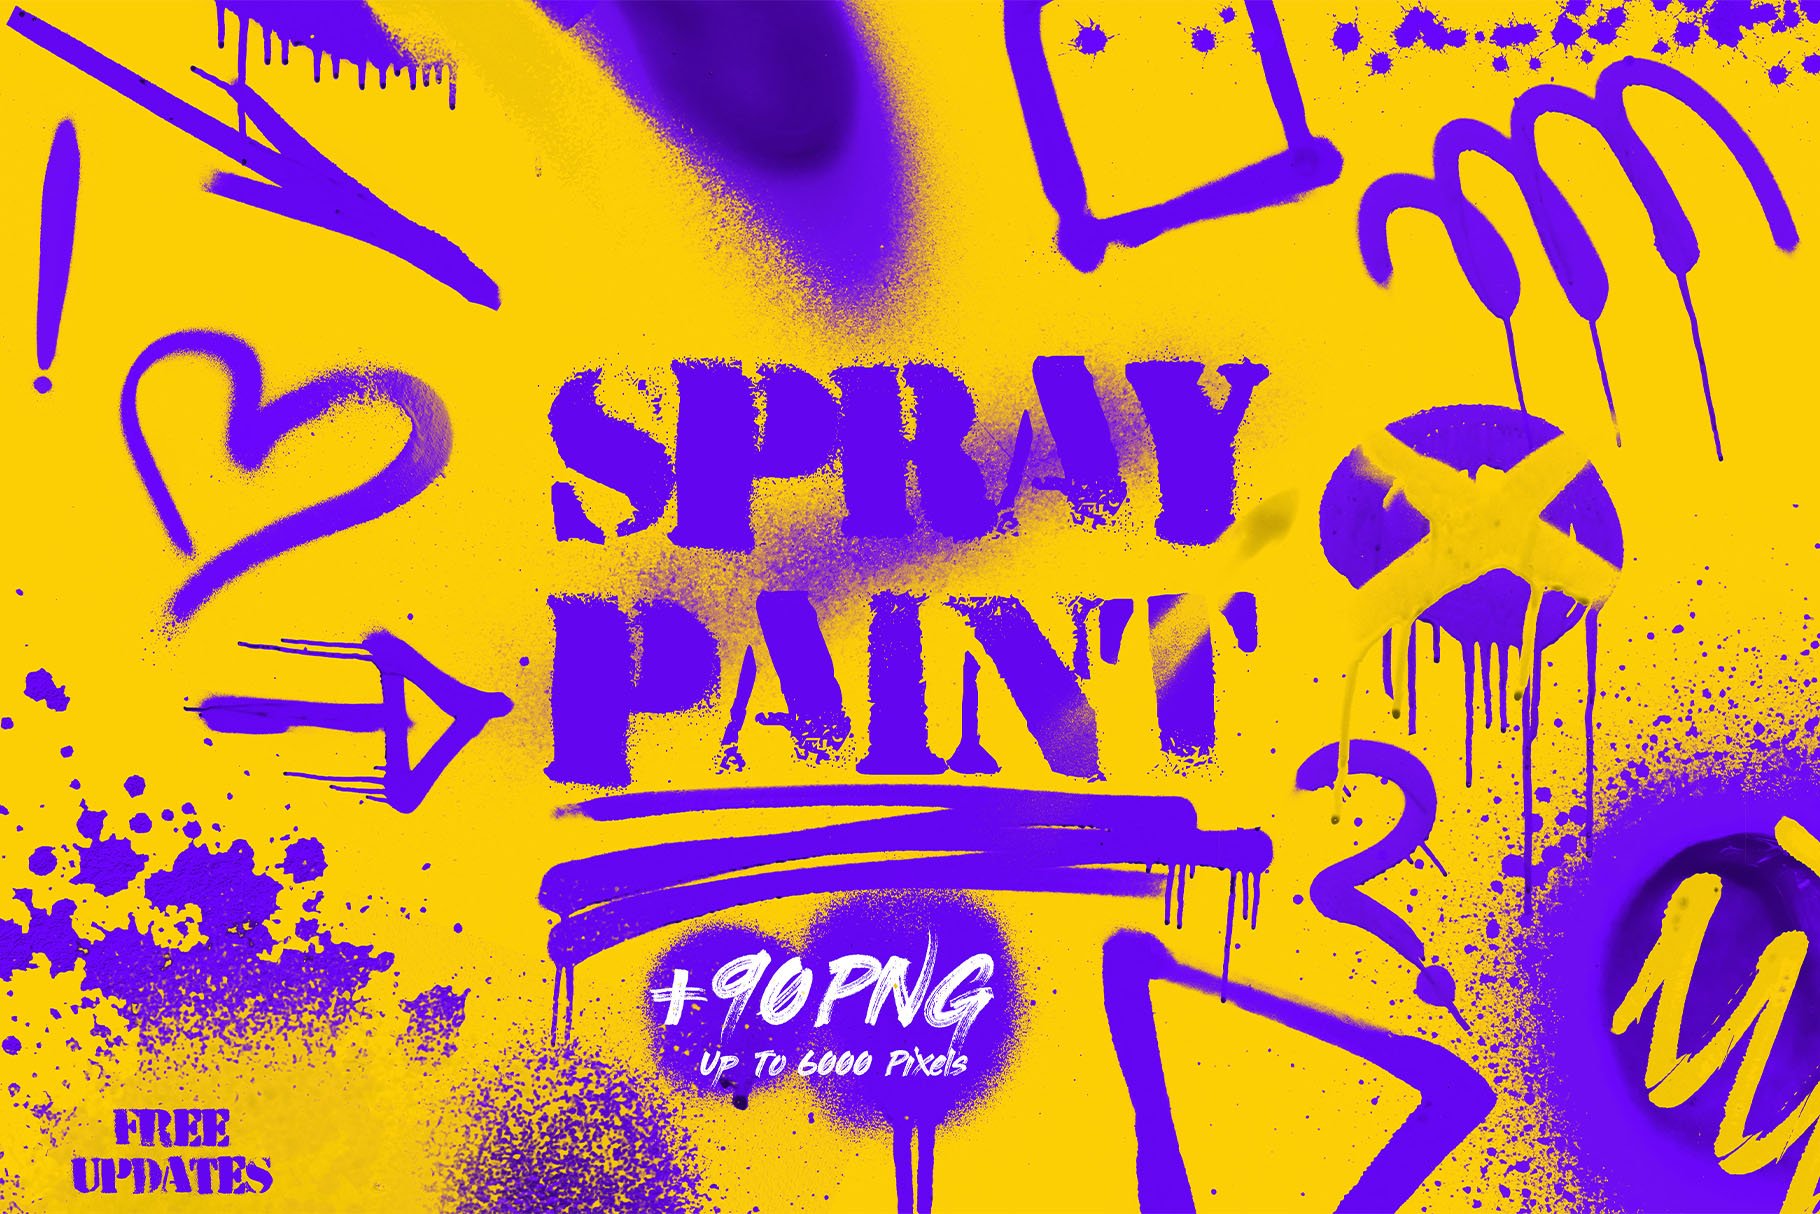 spray paint png